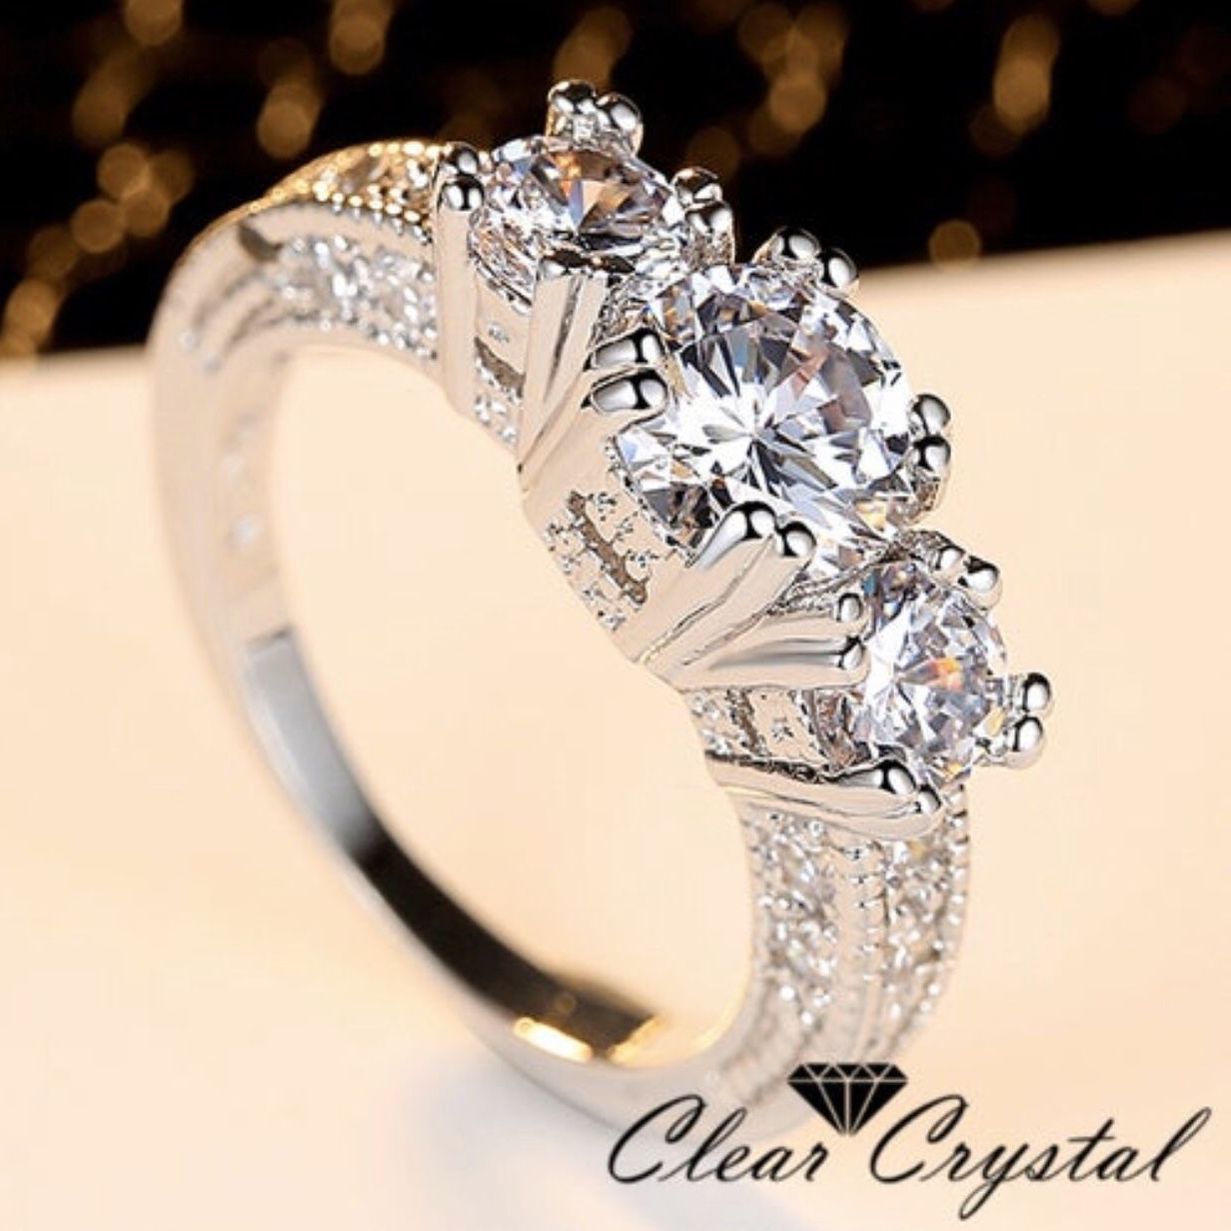 NEW Luxury CZ Ring for Wedding or Engagement - Size 9